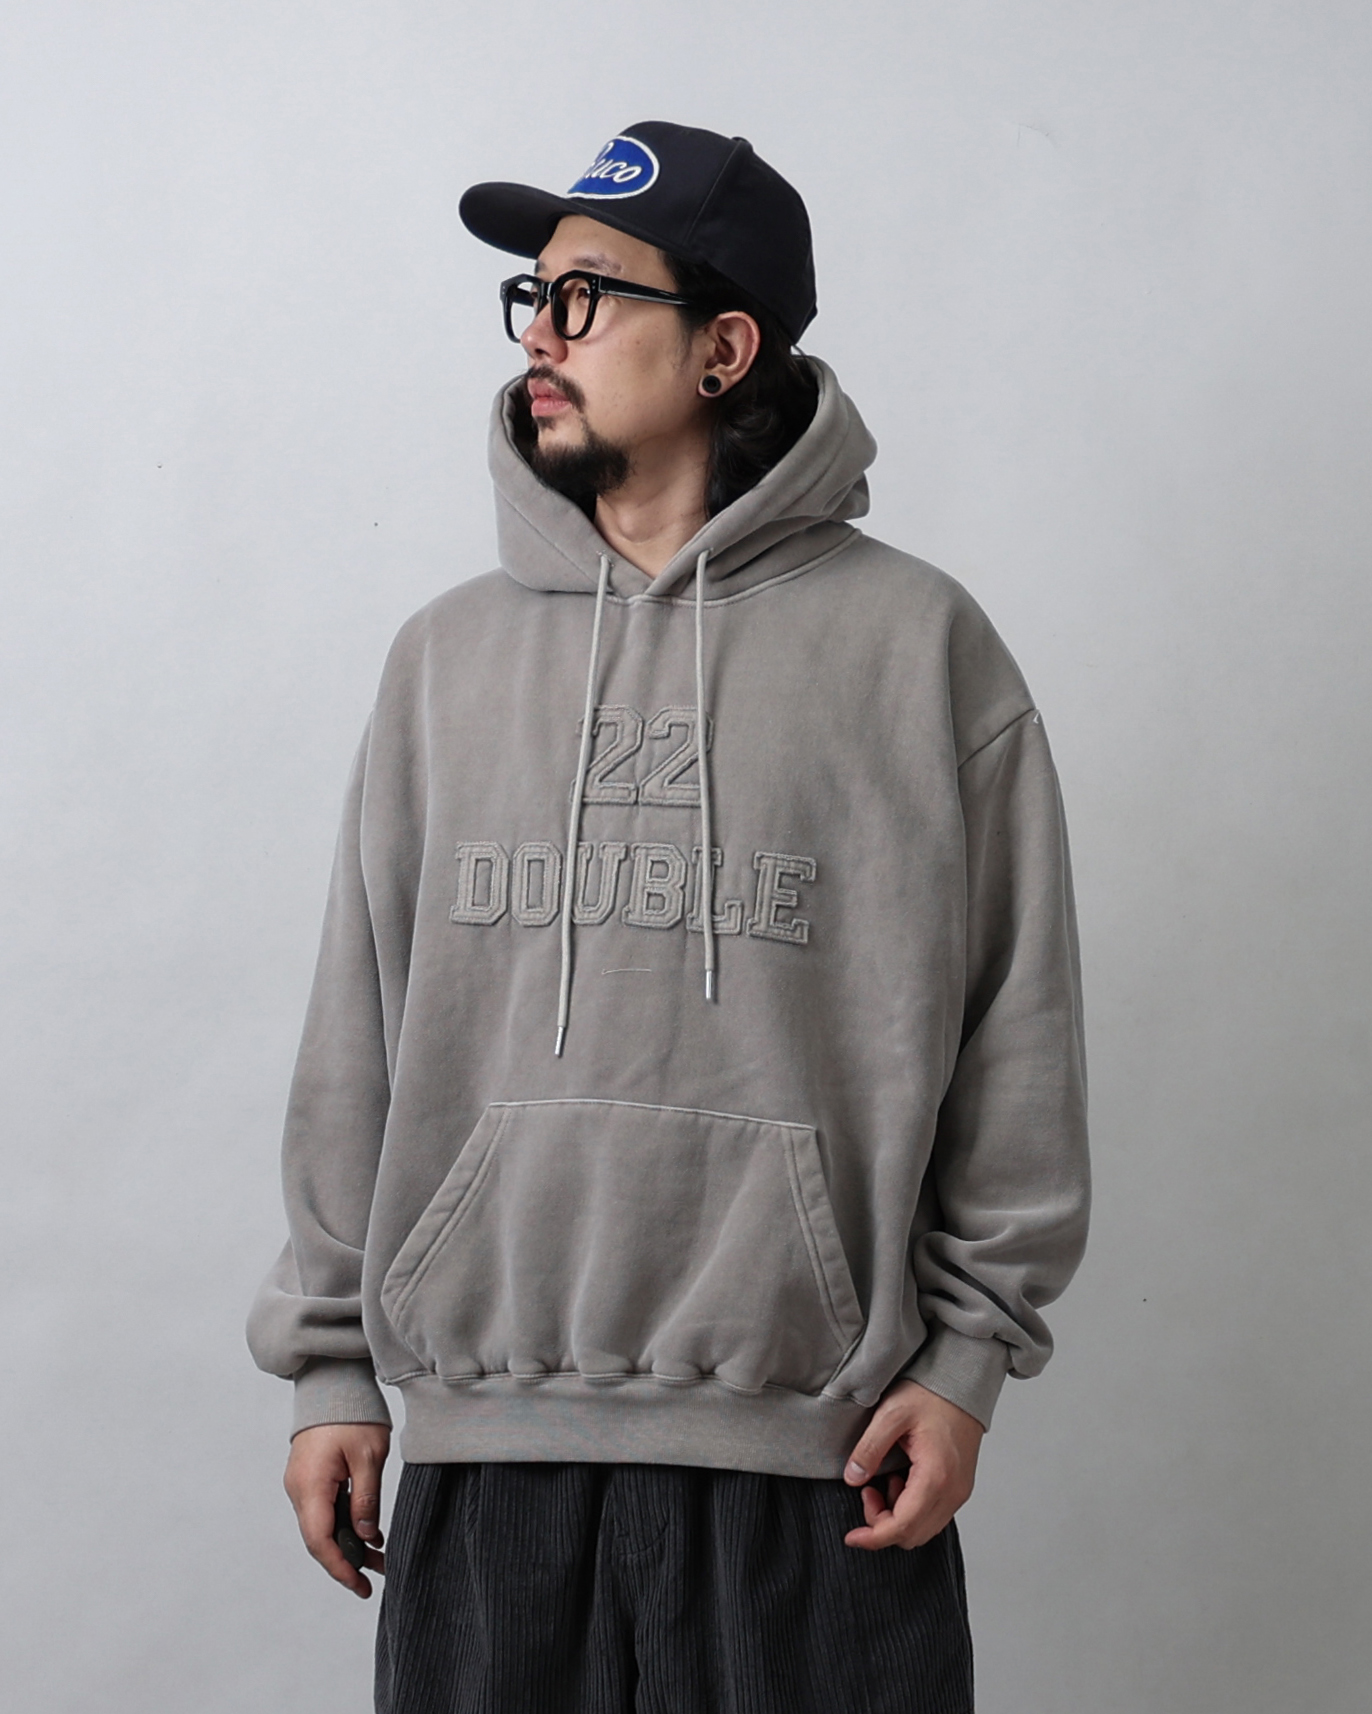 SIOT 22 DOUBLE Pigments Washed Hoodie (Charcoal/Light Gray/Brown Beige)